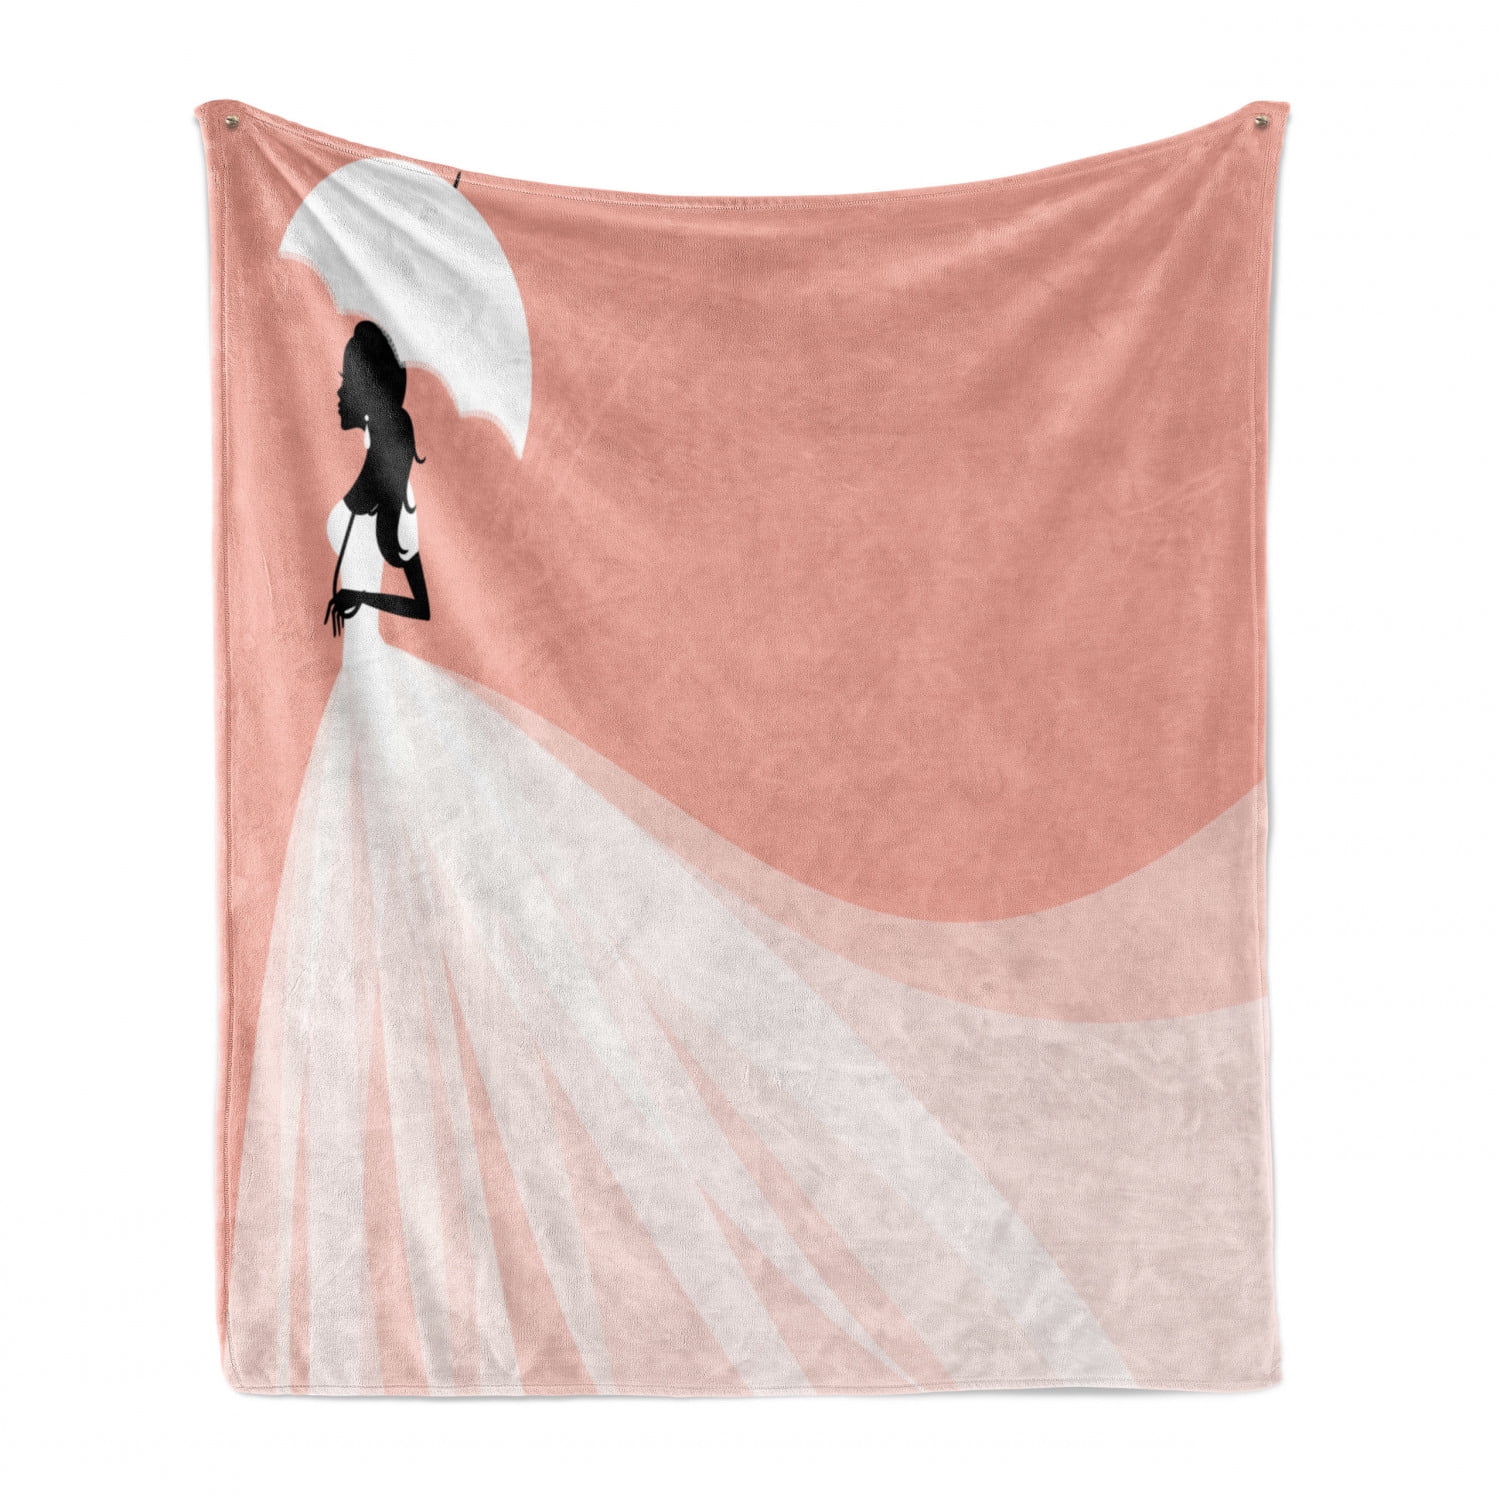 Cozy Plush for Indoor and Outdoor Use 50 x 60 Ambesonne Bridal Shower Soft Flannel Fleece Throw Blanket Bride in Abstract Romantic Wedding Dress with Umbrella Artwork Print Salmon and White